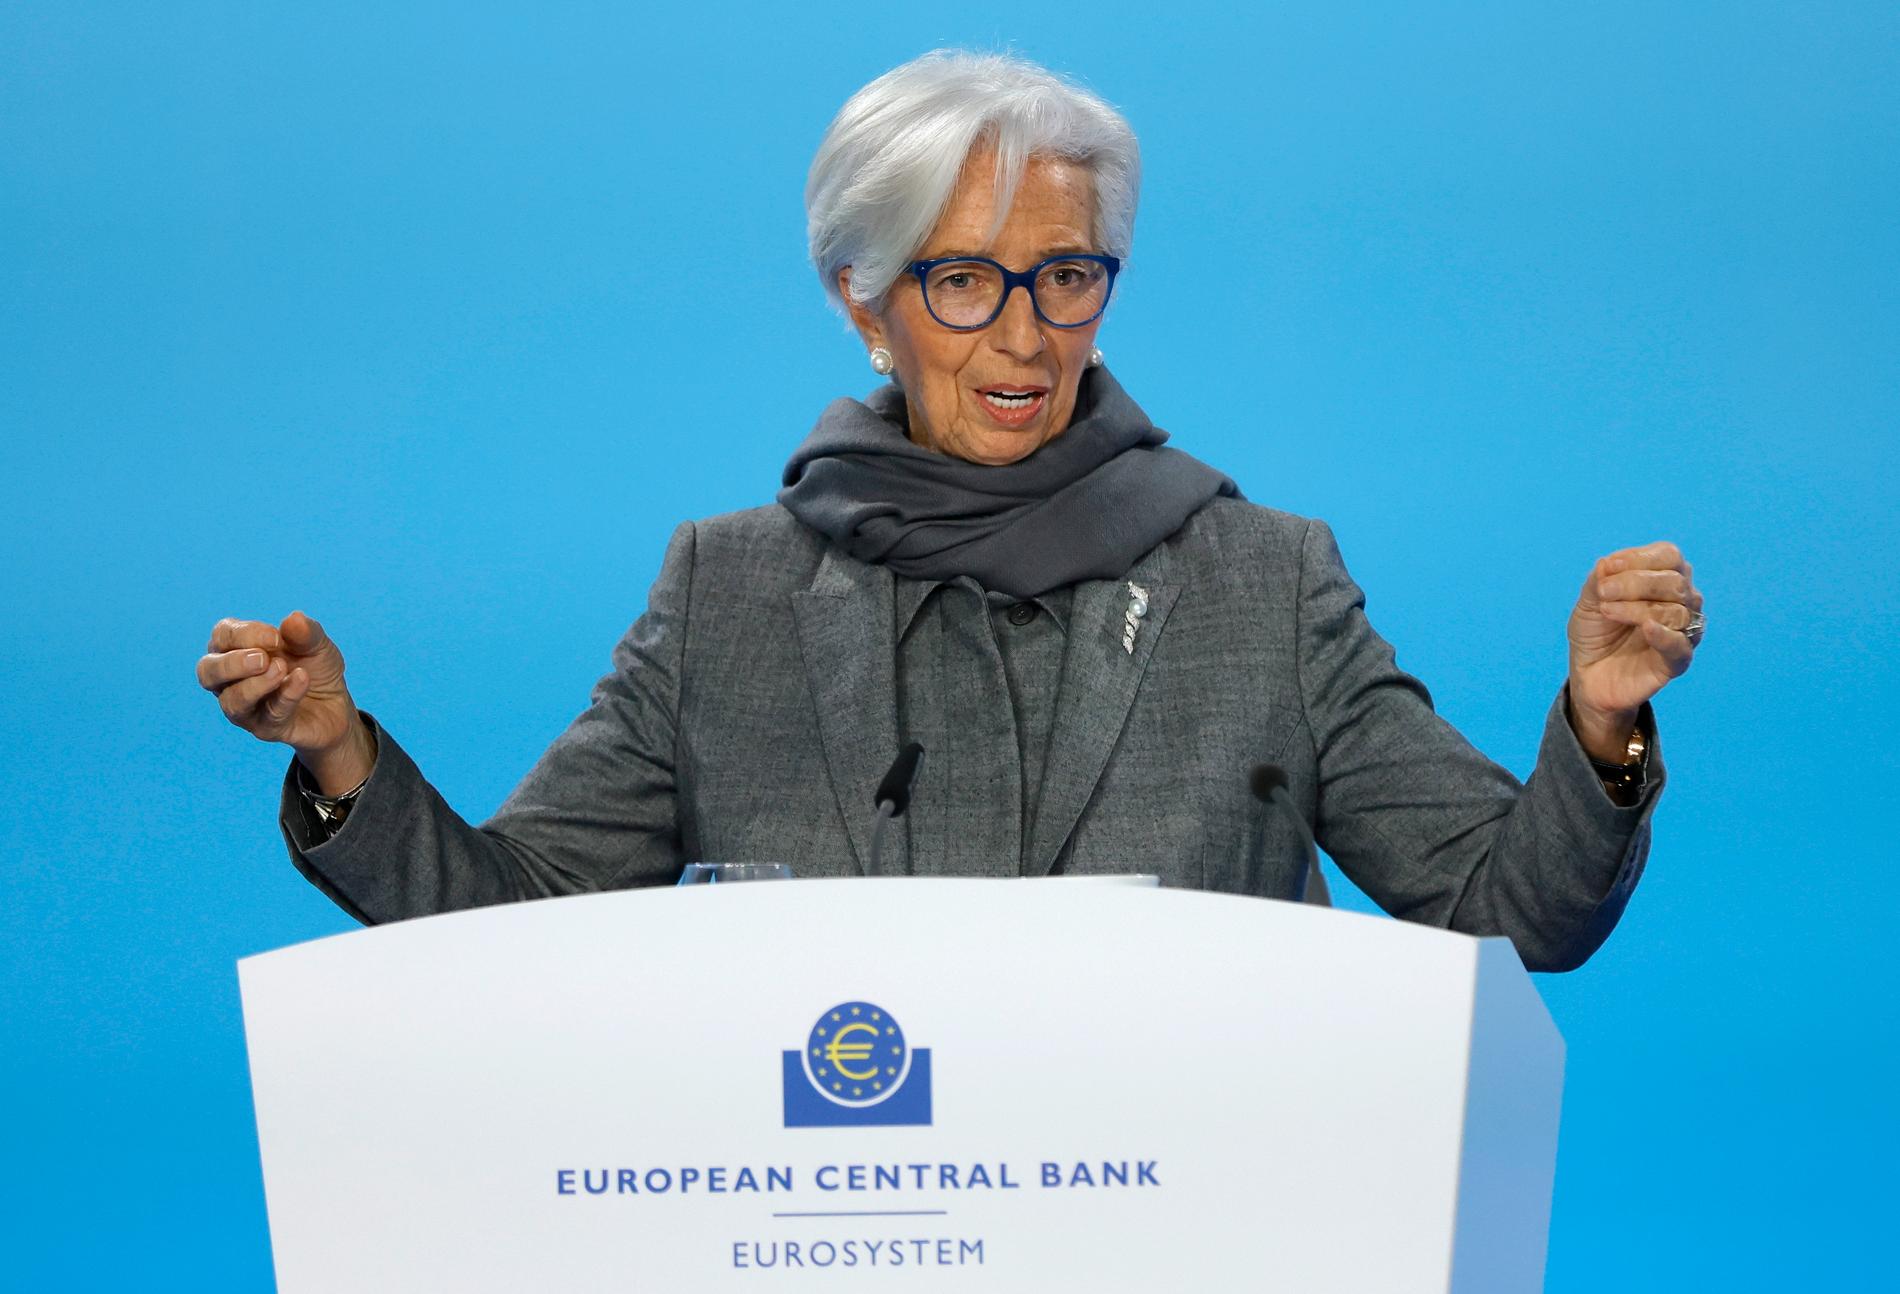 Warning: Christine Lagarde believes a Trump victory would pose a threat to European security.